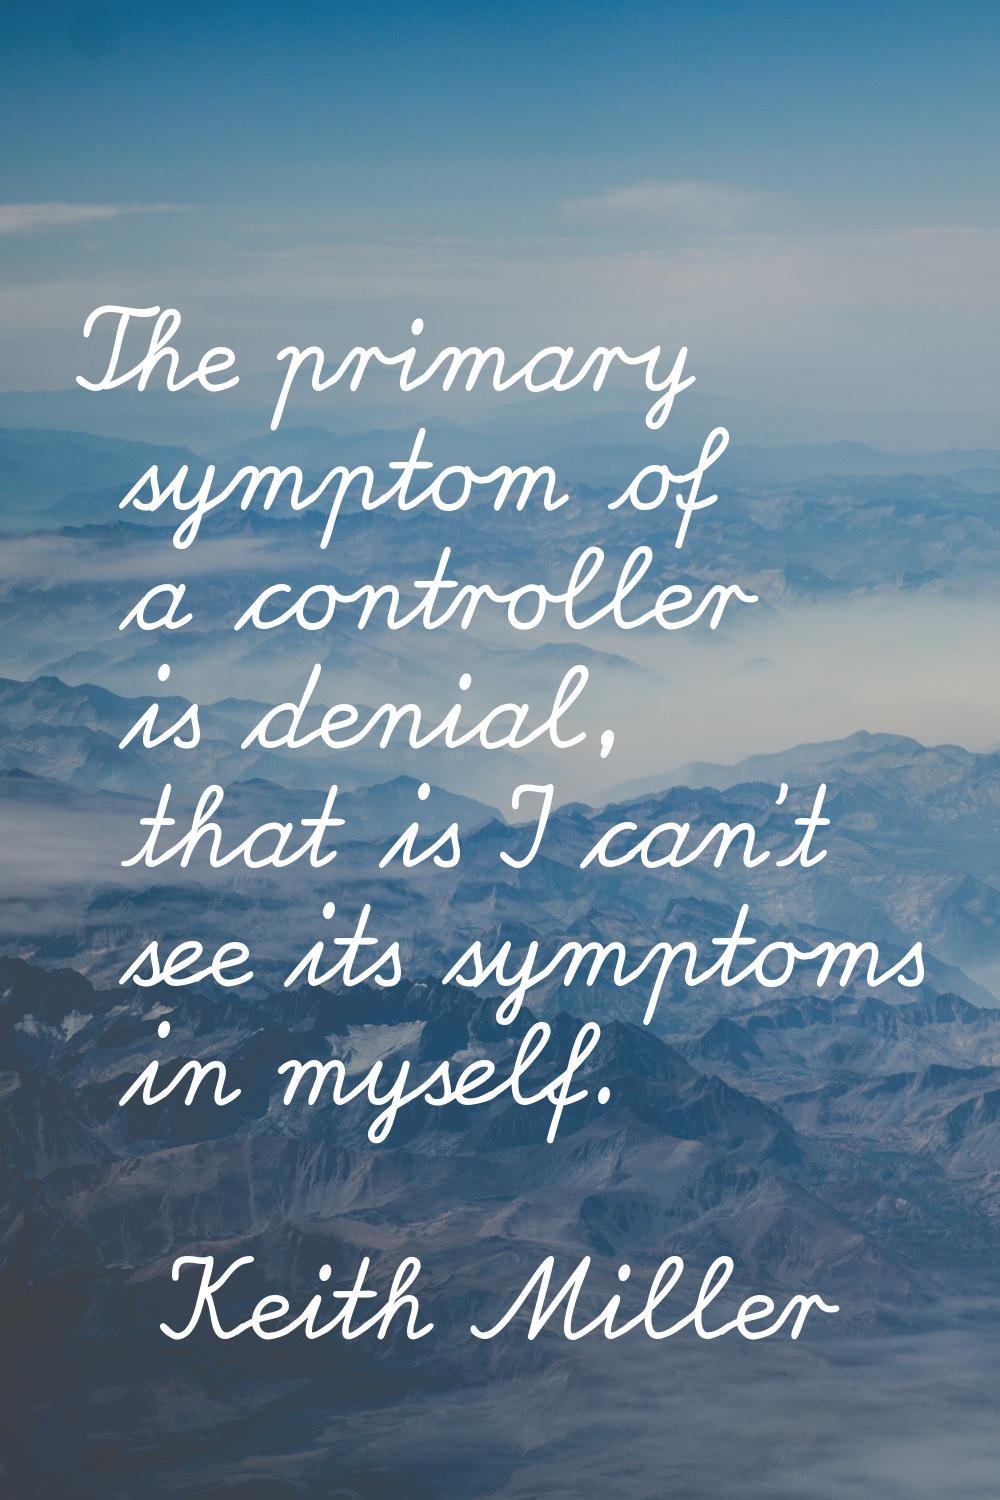 The primary symptom of a controller is denial, that is I can't see its symptoms in myself.